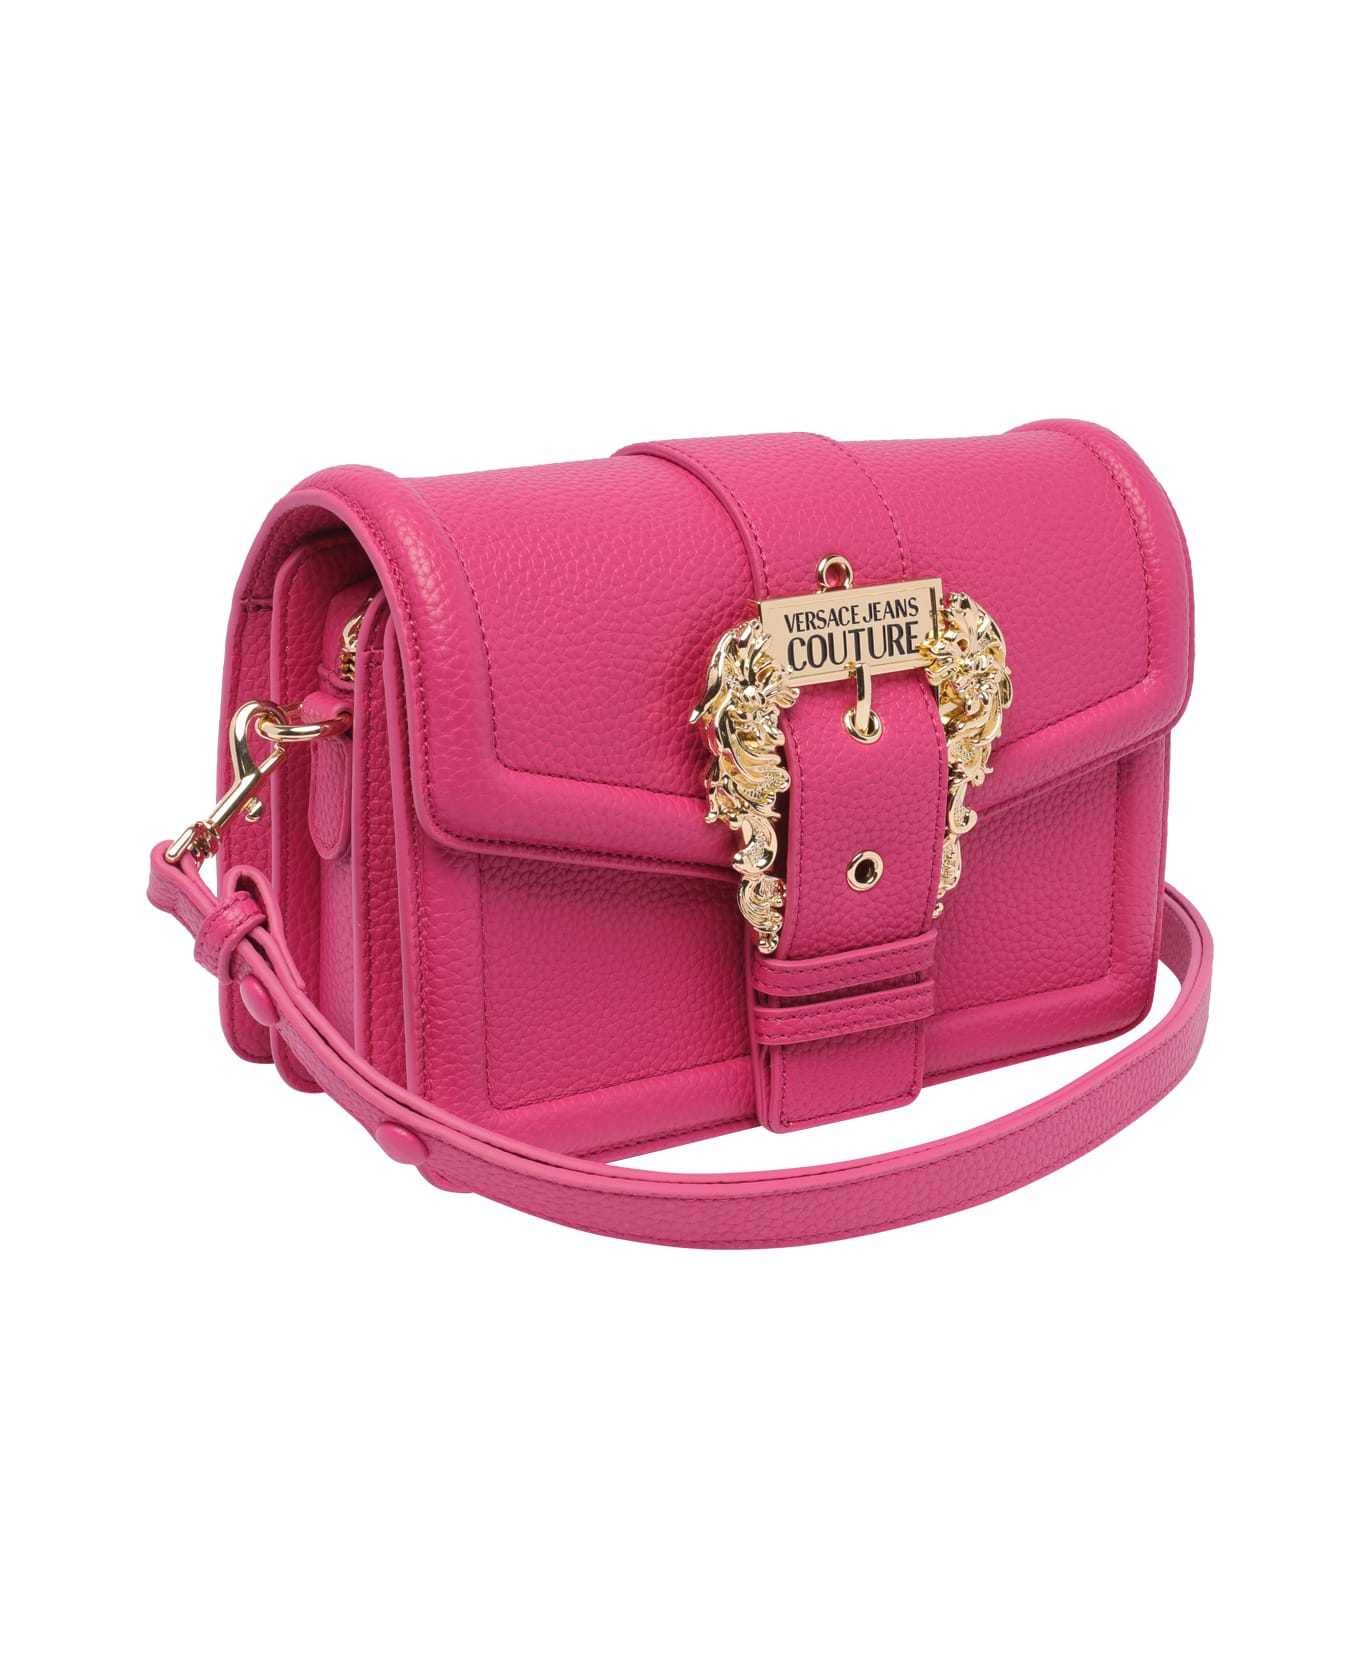 Versace Jeans Couture Bag - fuxia